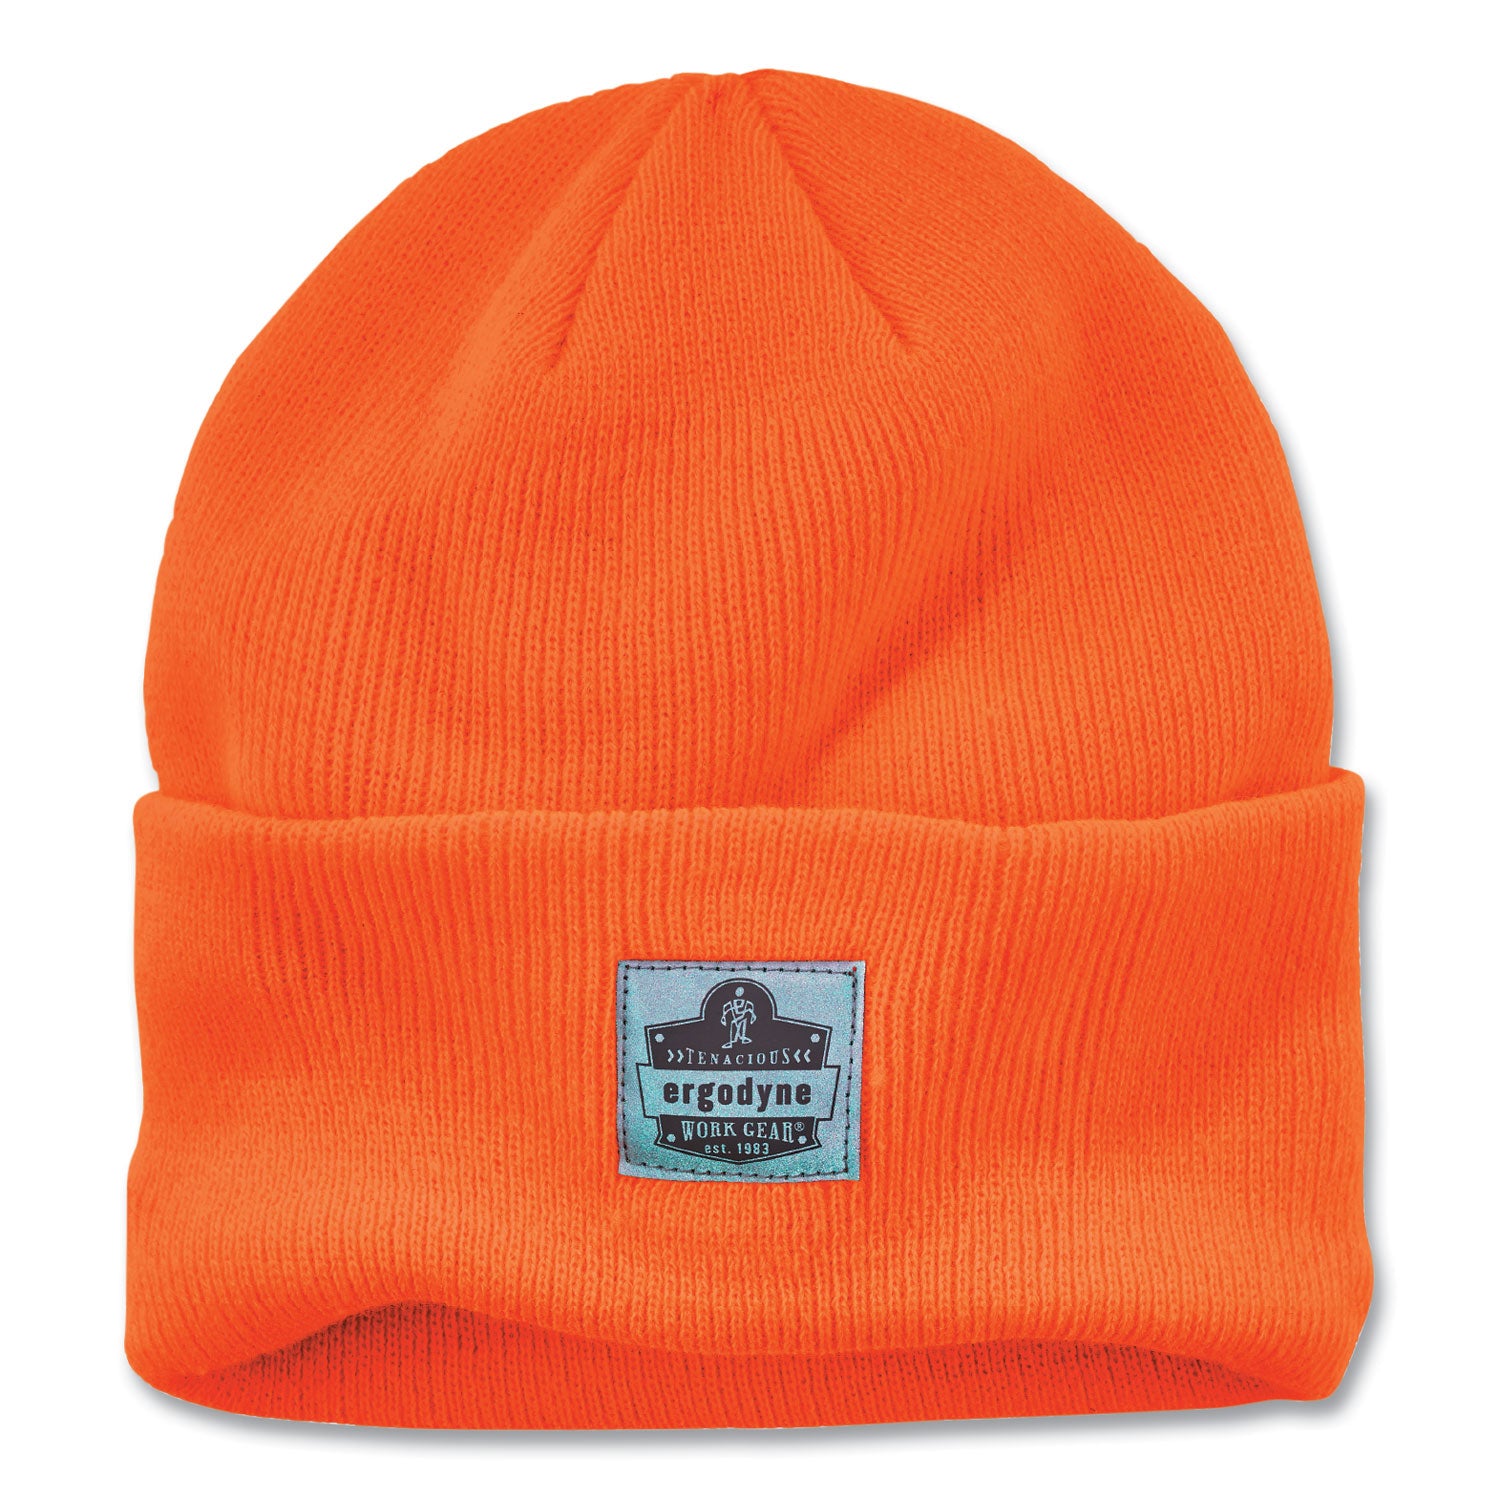 n-ferno-6806-cuffed-rib-knit-winter-hat-one-size-fits-most-orange-ships-in-1-3-business-days_ego16807 - 1